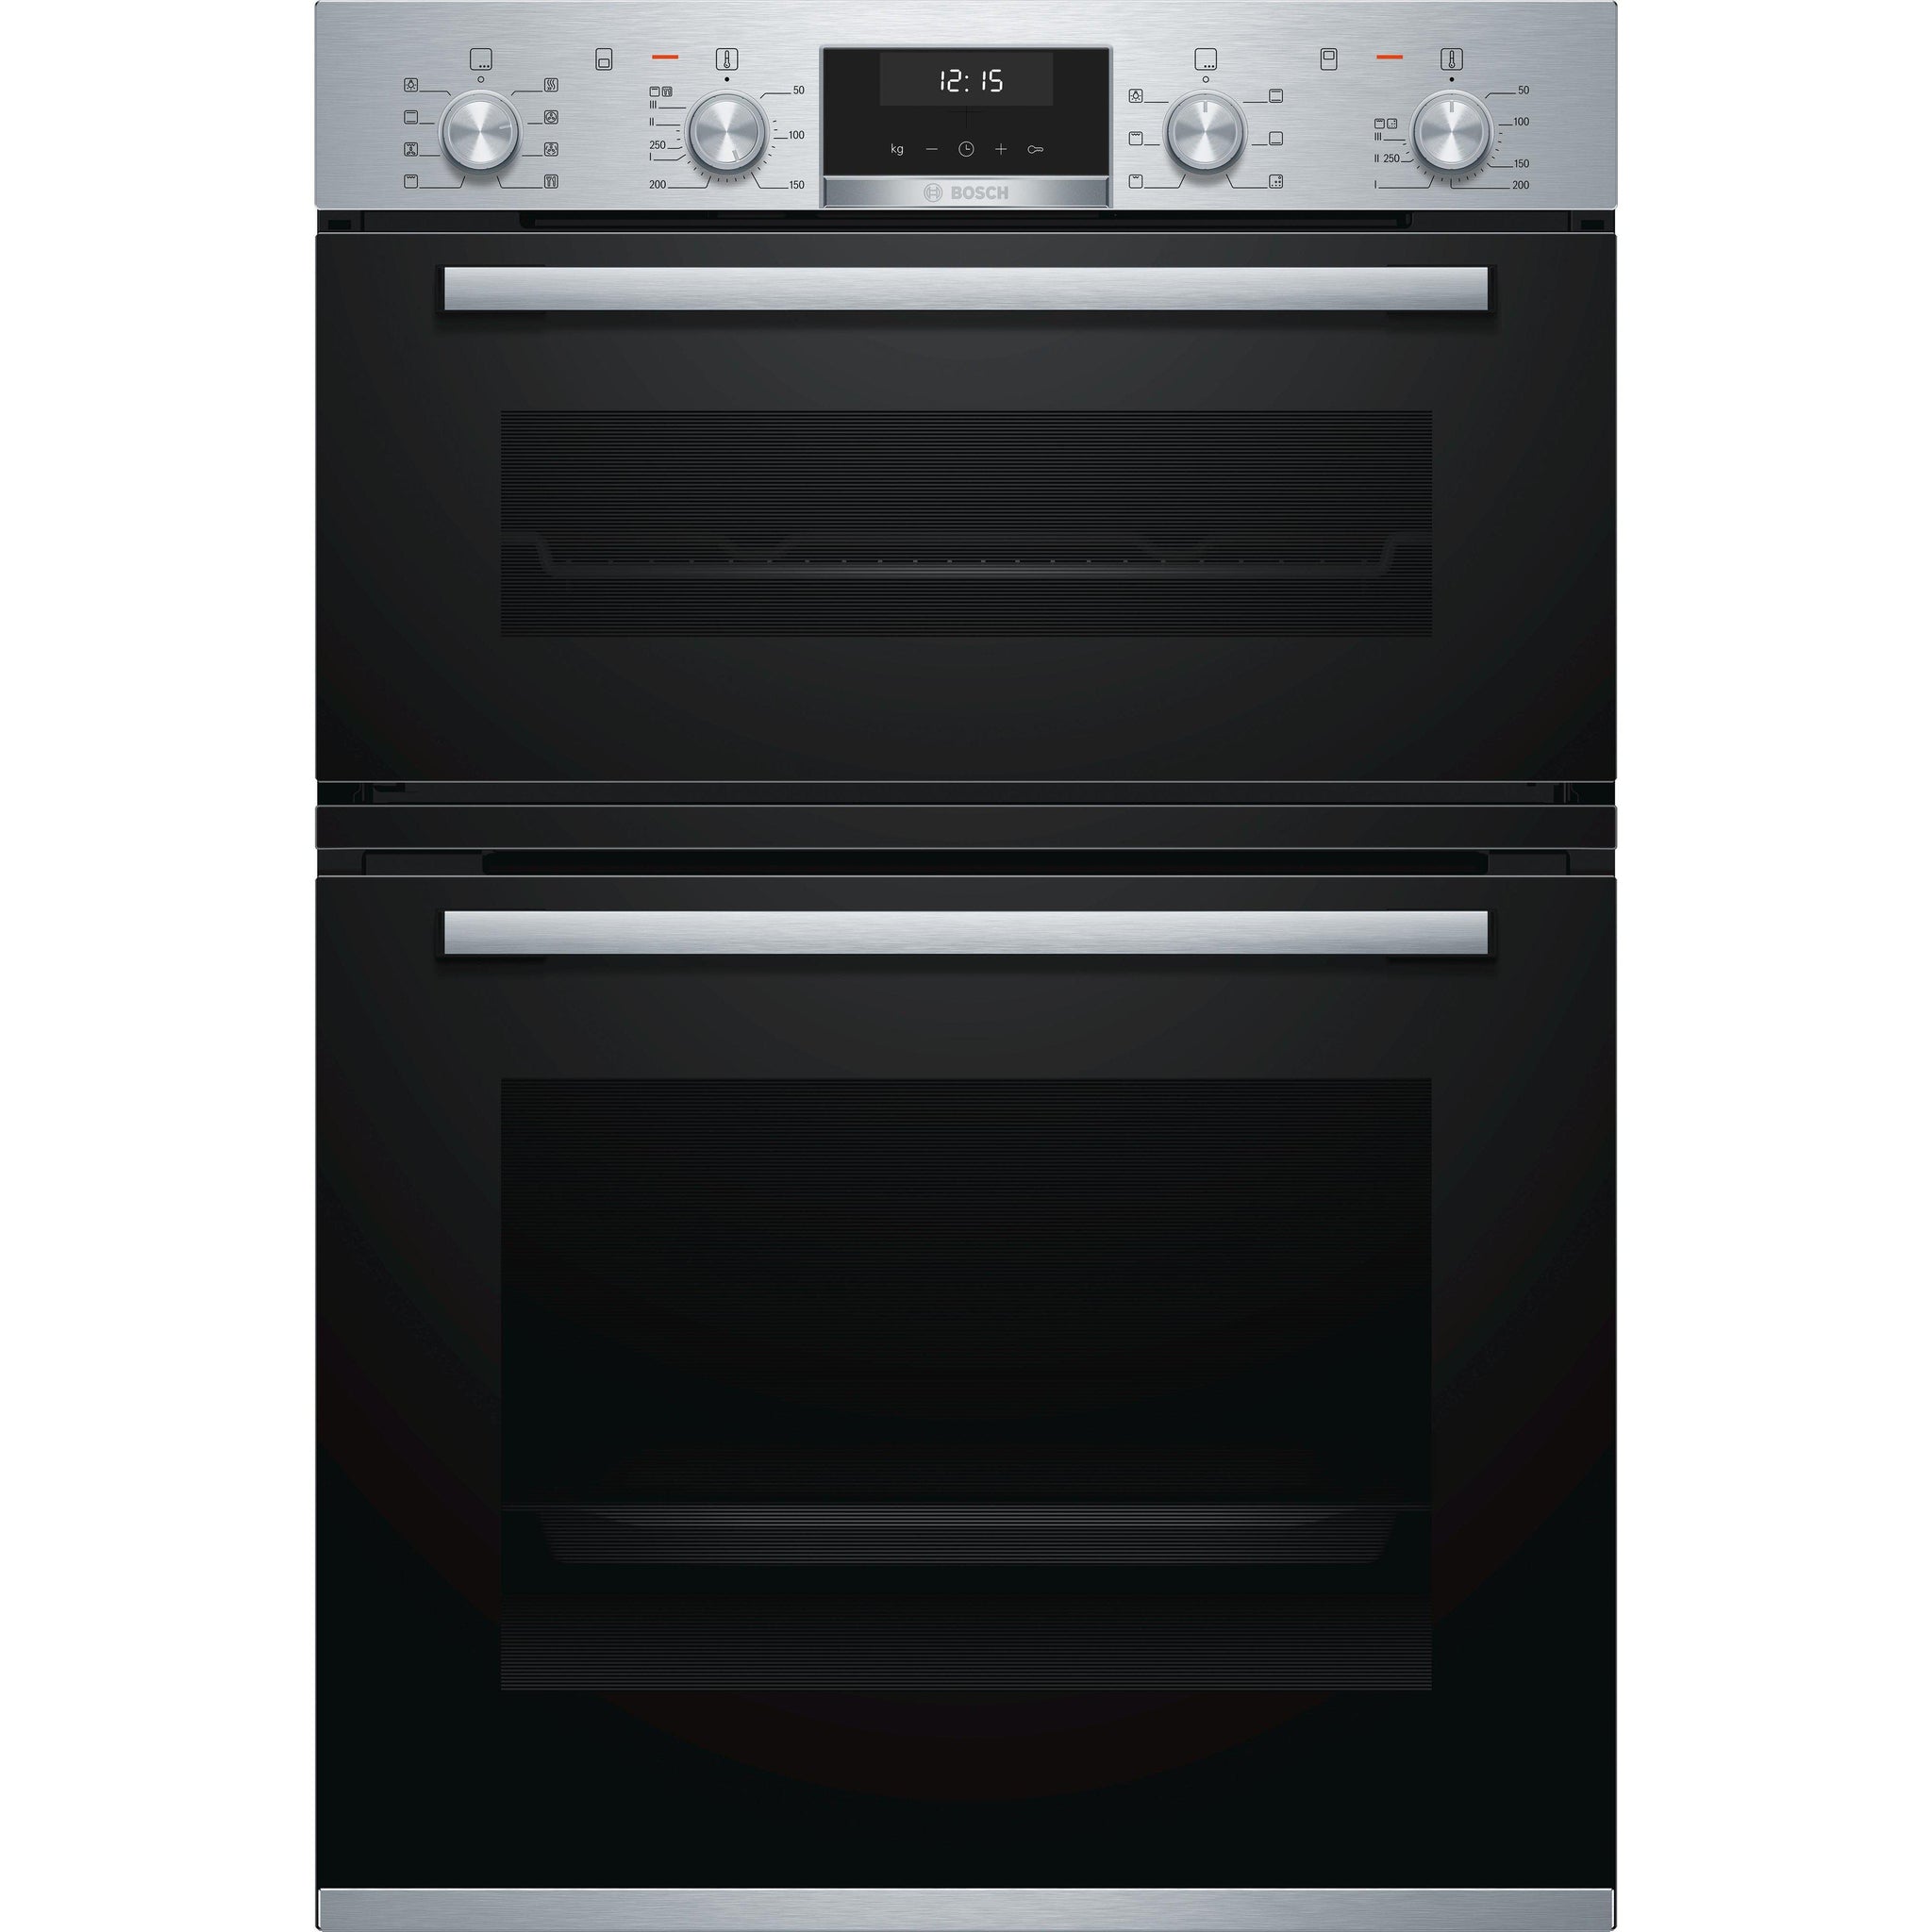 Bosch Series 6 Mba5350s0b Builtin Double Oven Stainless Steel Delivery Within 710 Days